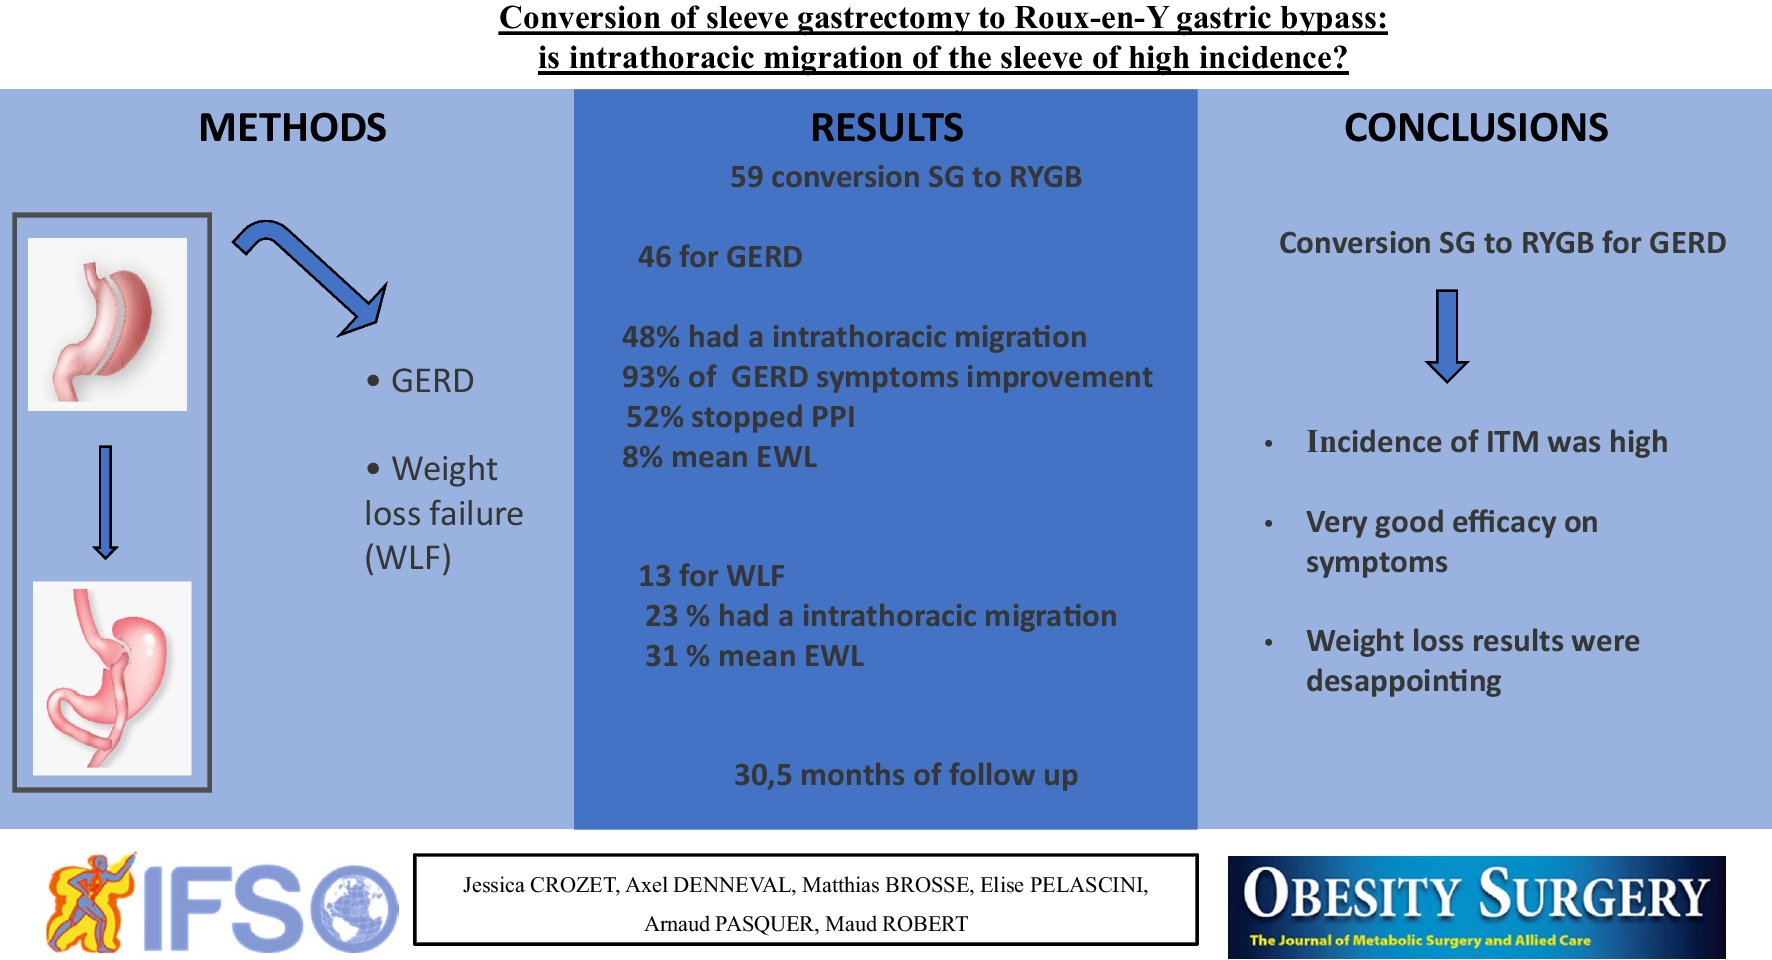 Conversion of Sleeve Gastrectomy to Roux-en-Y Gastric Bypass: Is Intrathoracic Migration of the Sleeve of High Incidence?